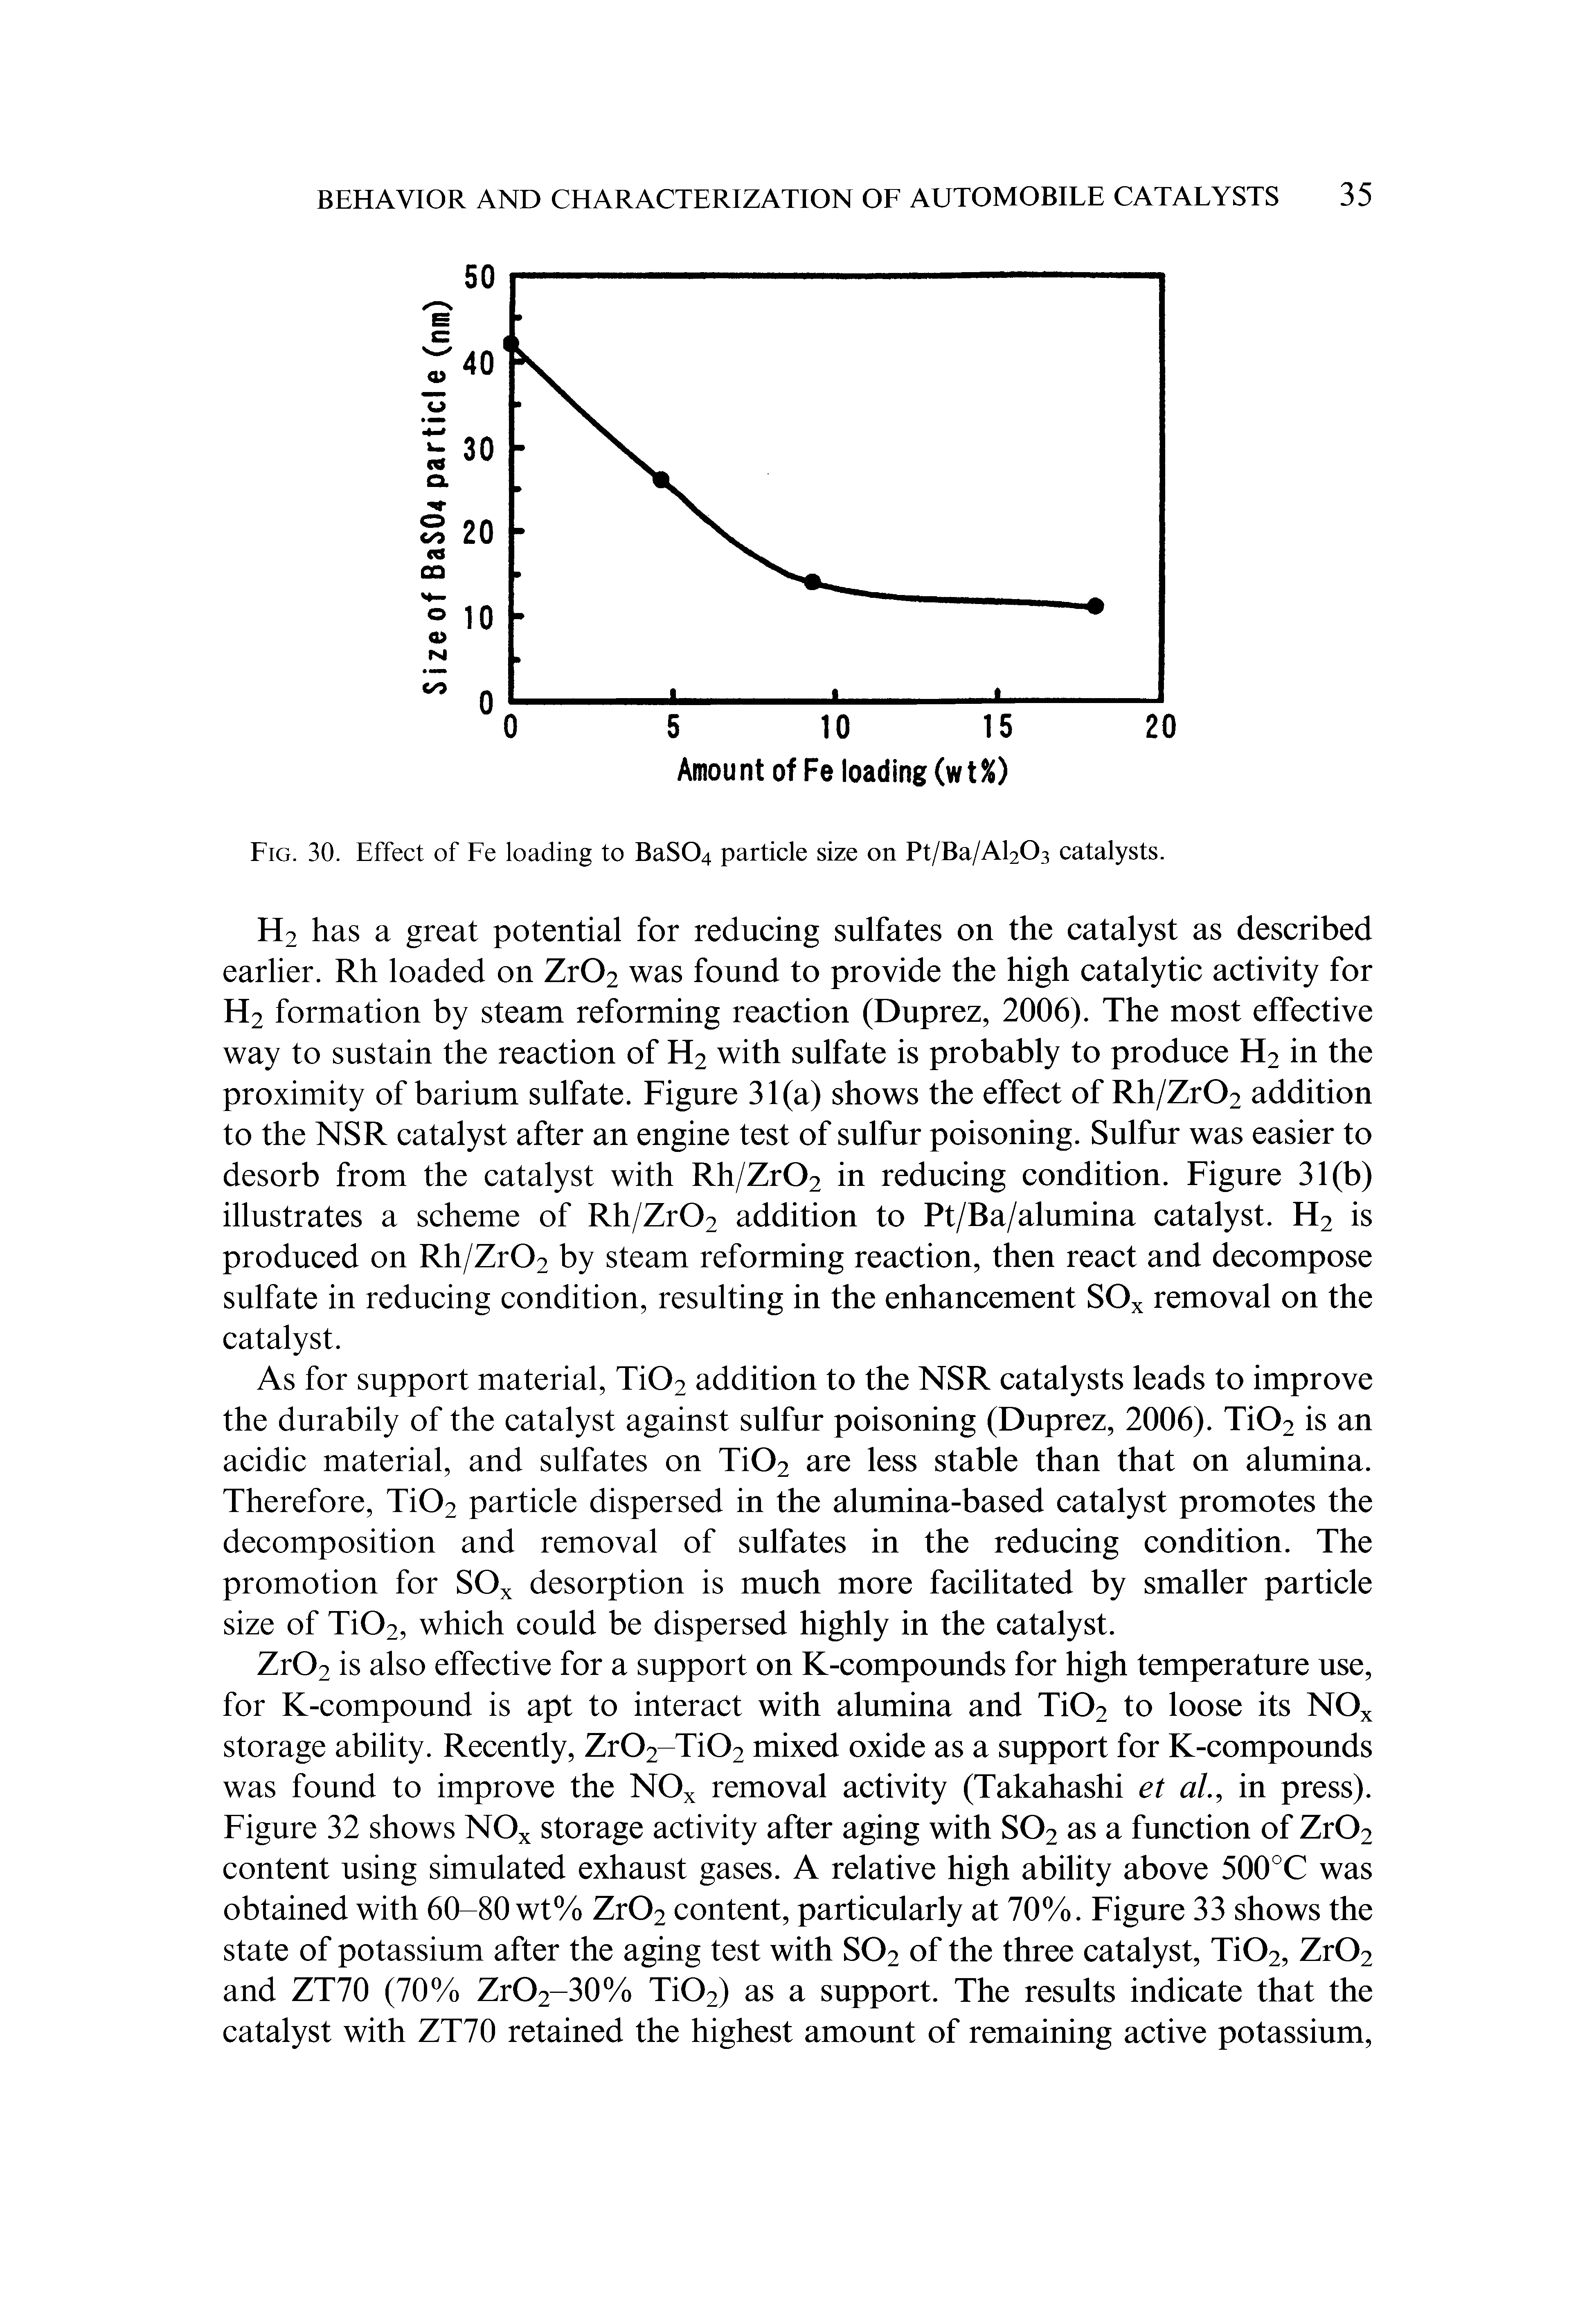 Fig. 30. Effect of Fe loading to BaS04 particle size on Pt/Ba/Al203 catalysts.